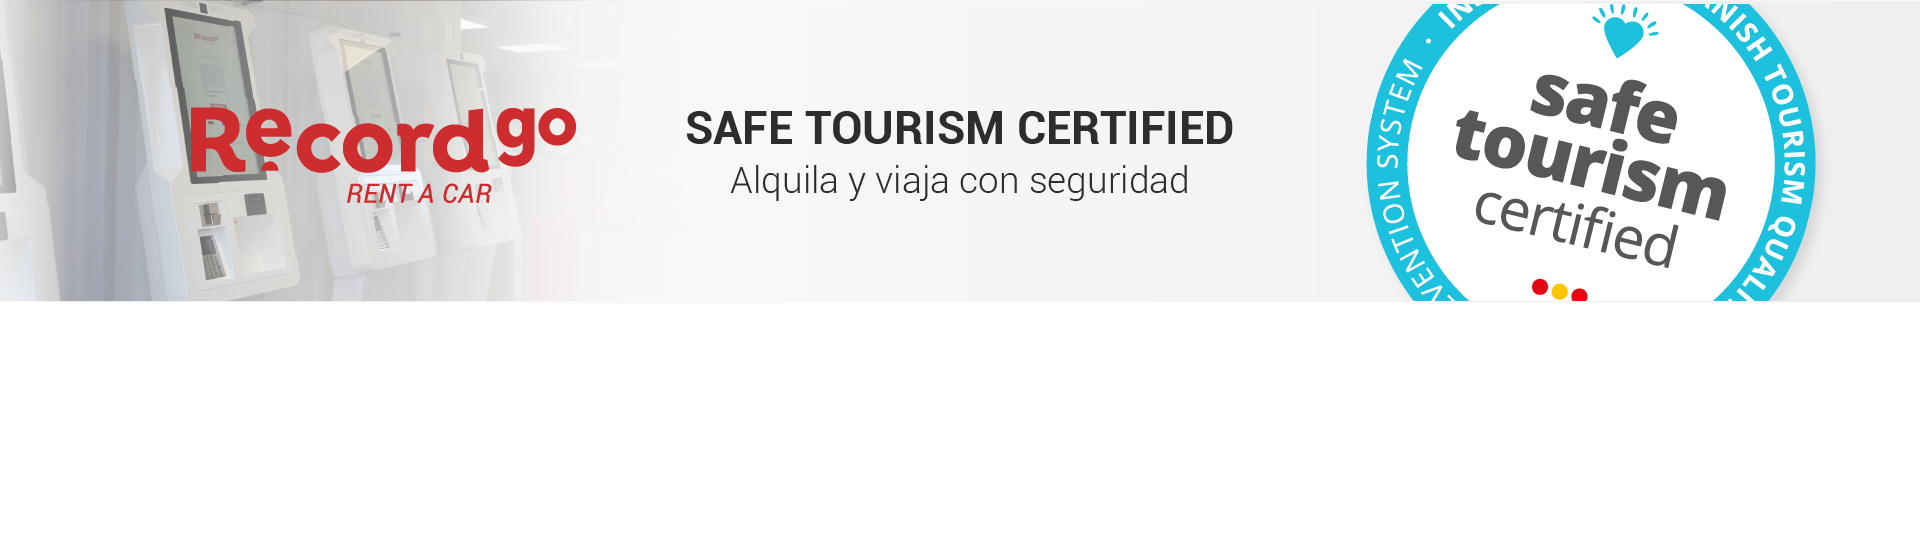 Sello “Safe Tourism Certified"